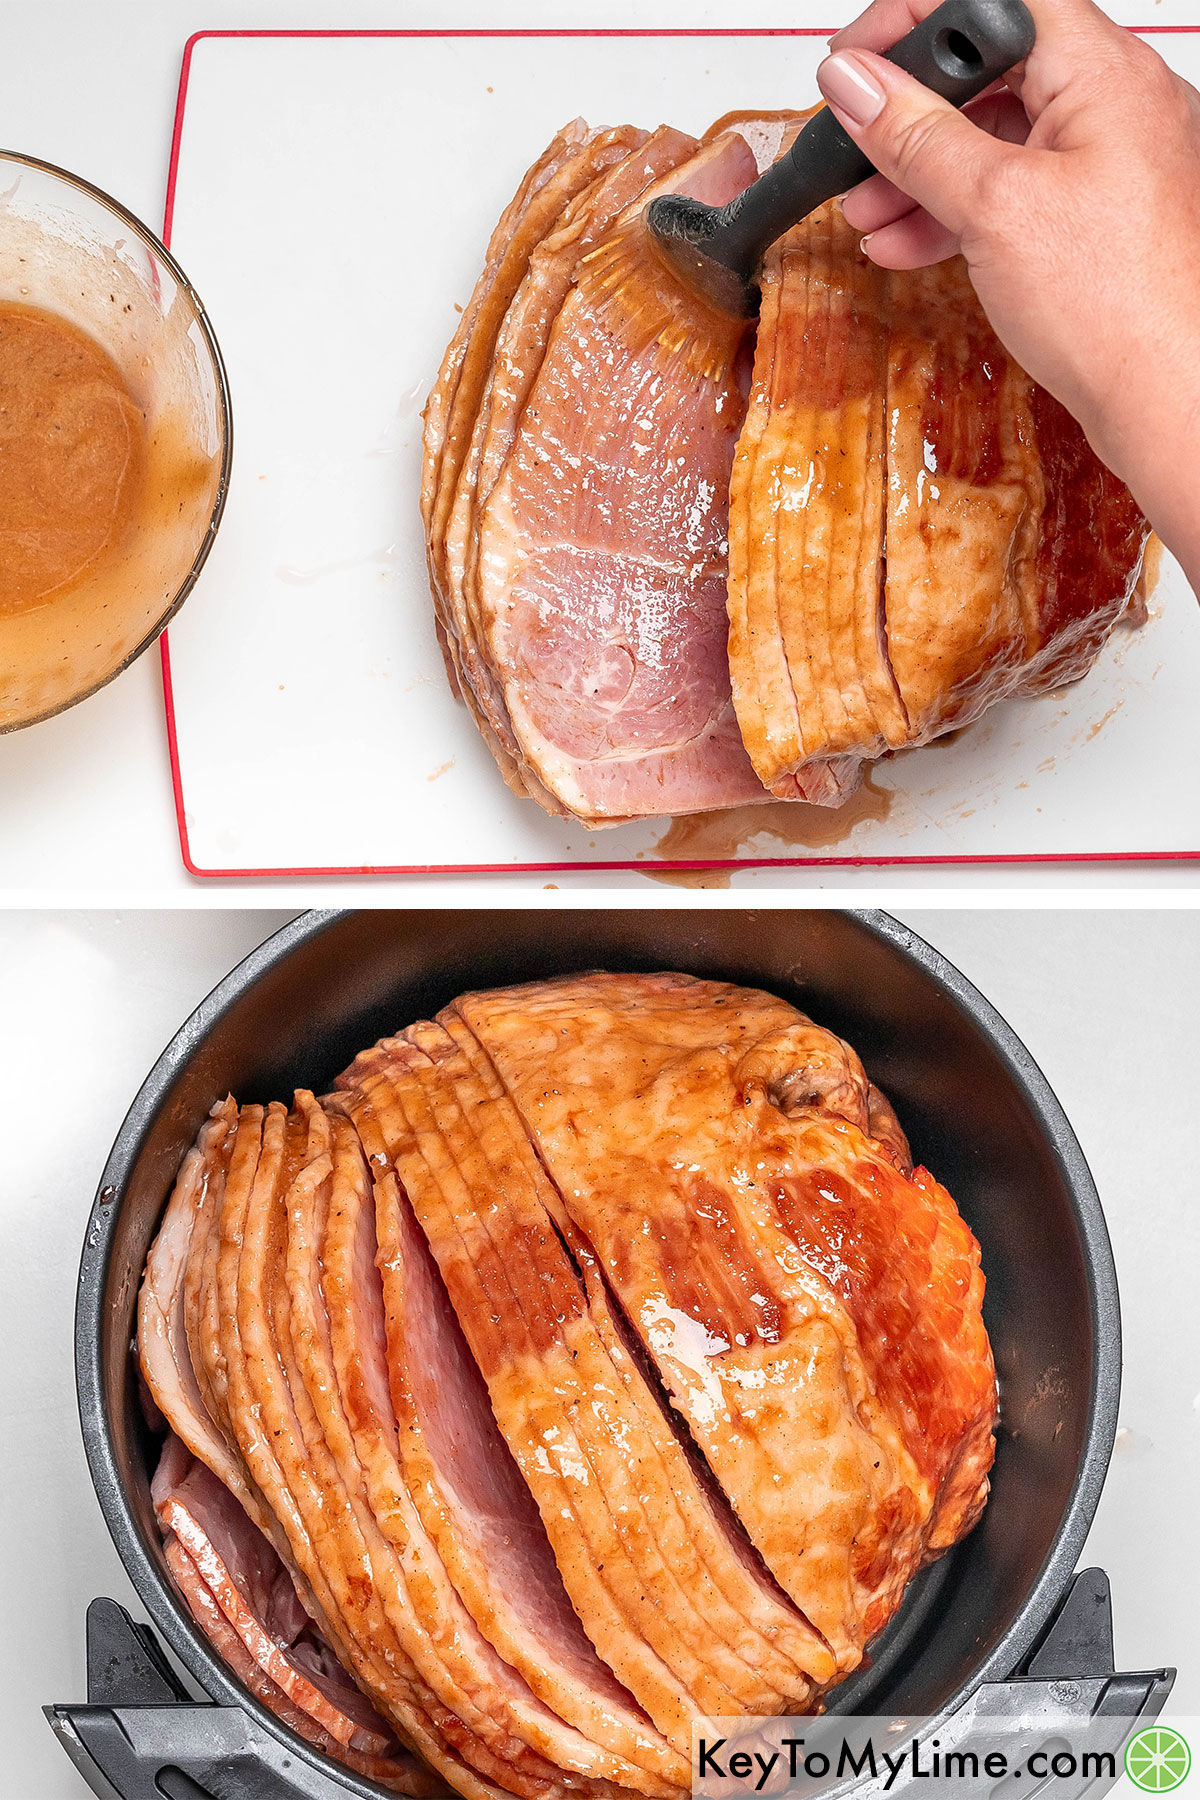 Brushing two thirds of the mixed glaze on top of the spiral ham, and then placing the ham in an air fryer basket.